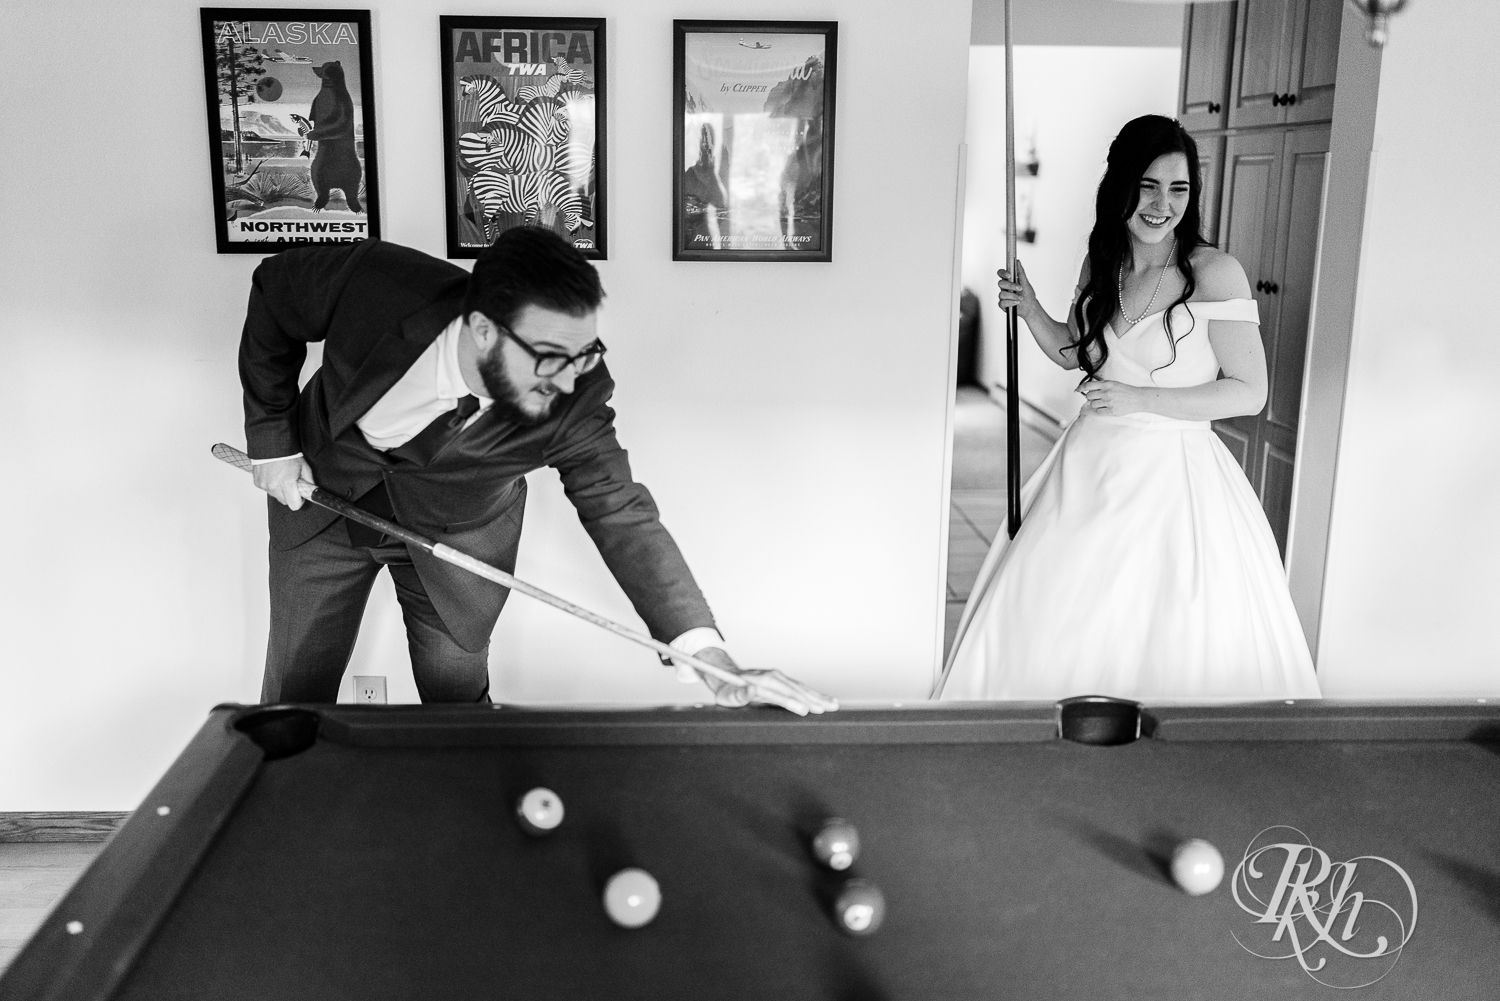 Bride and groom play pool at their house wedding in Sartell, Minnesota.